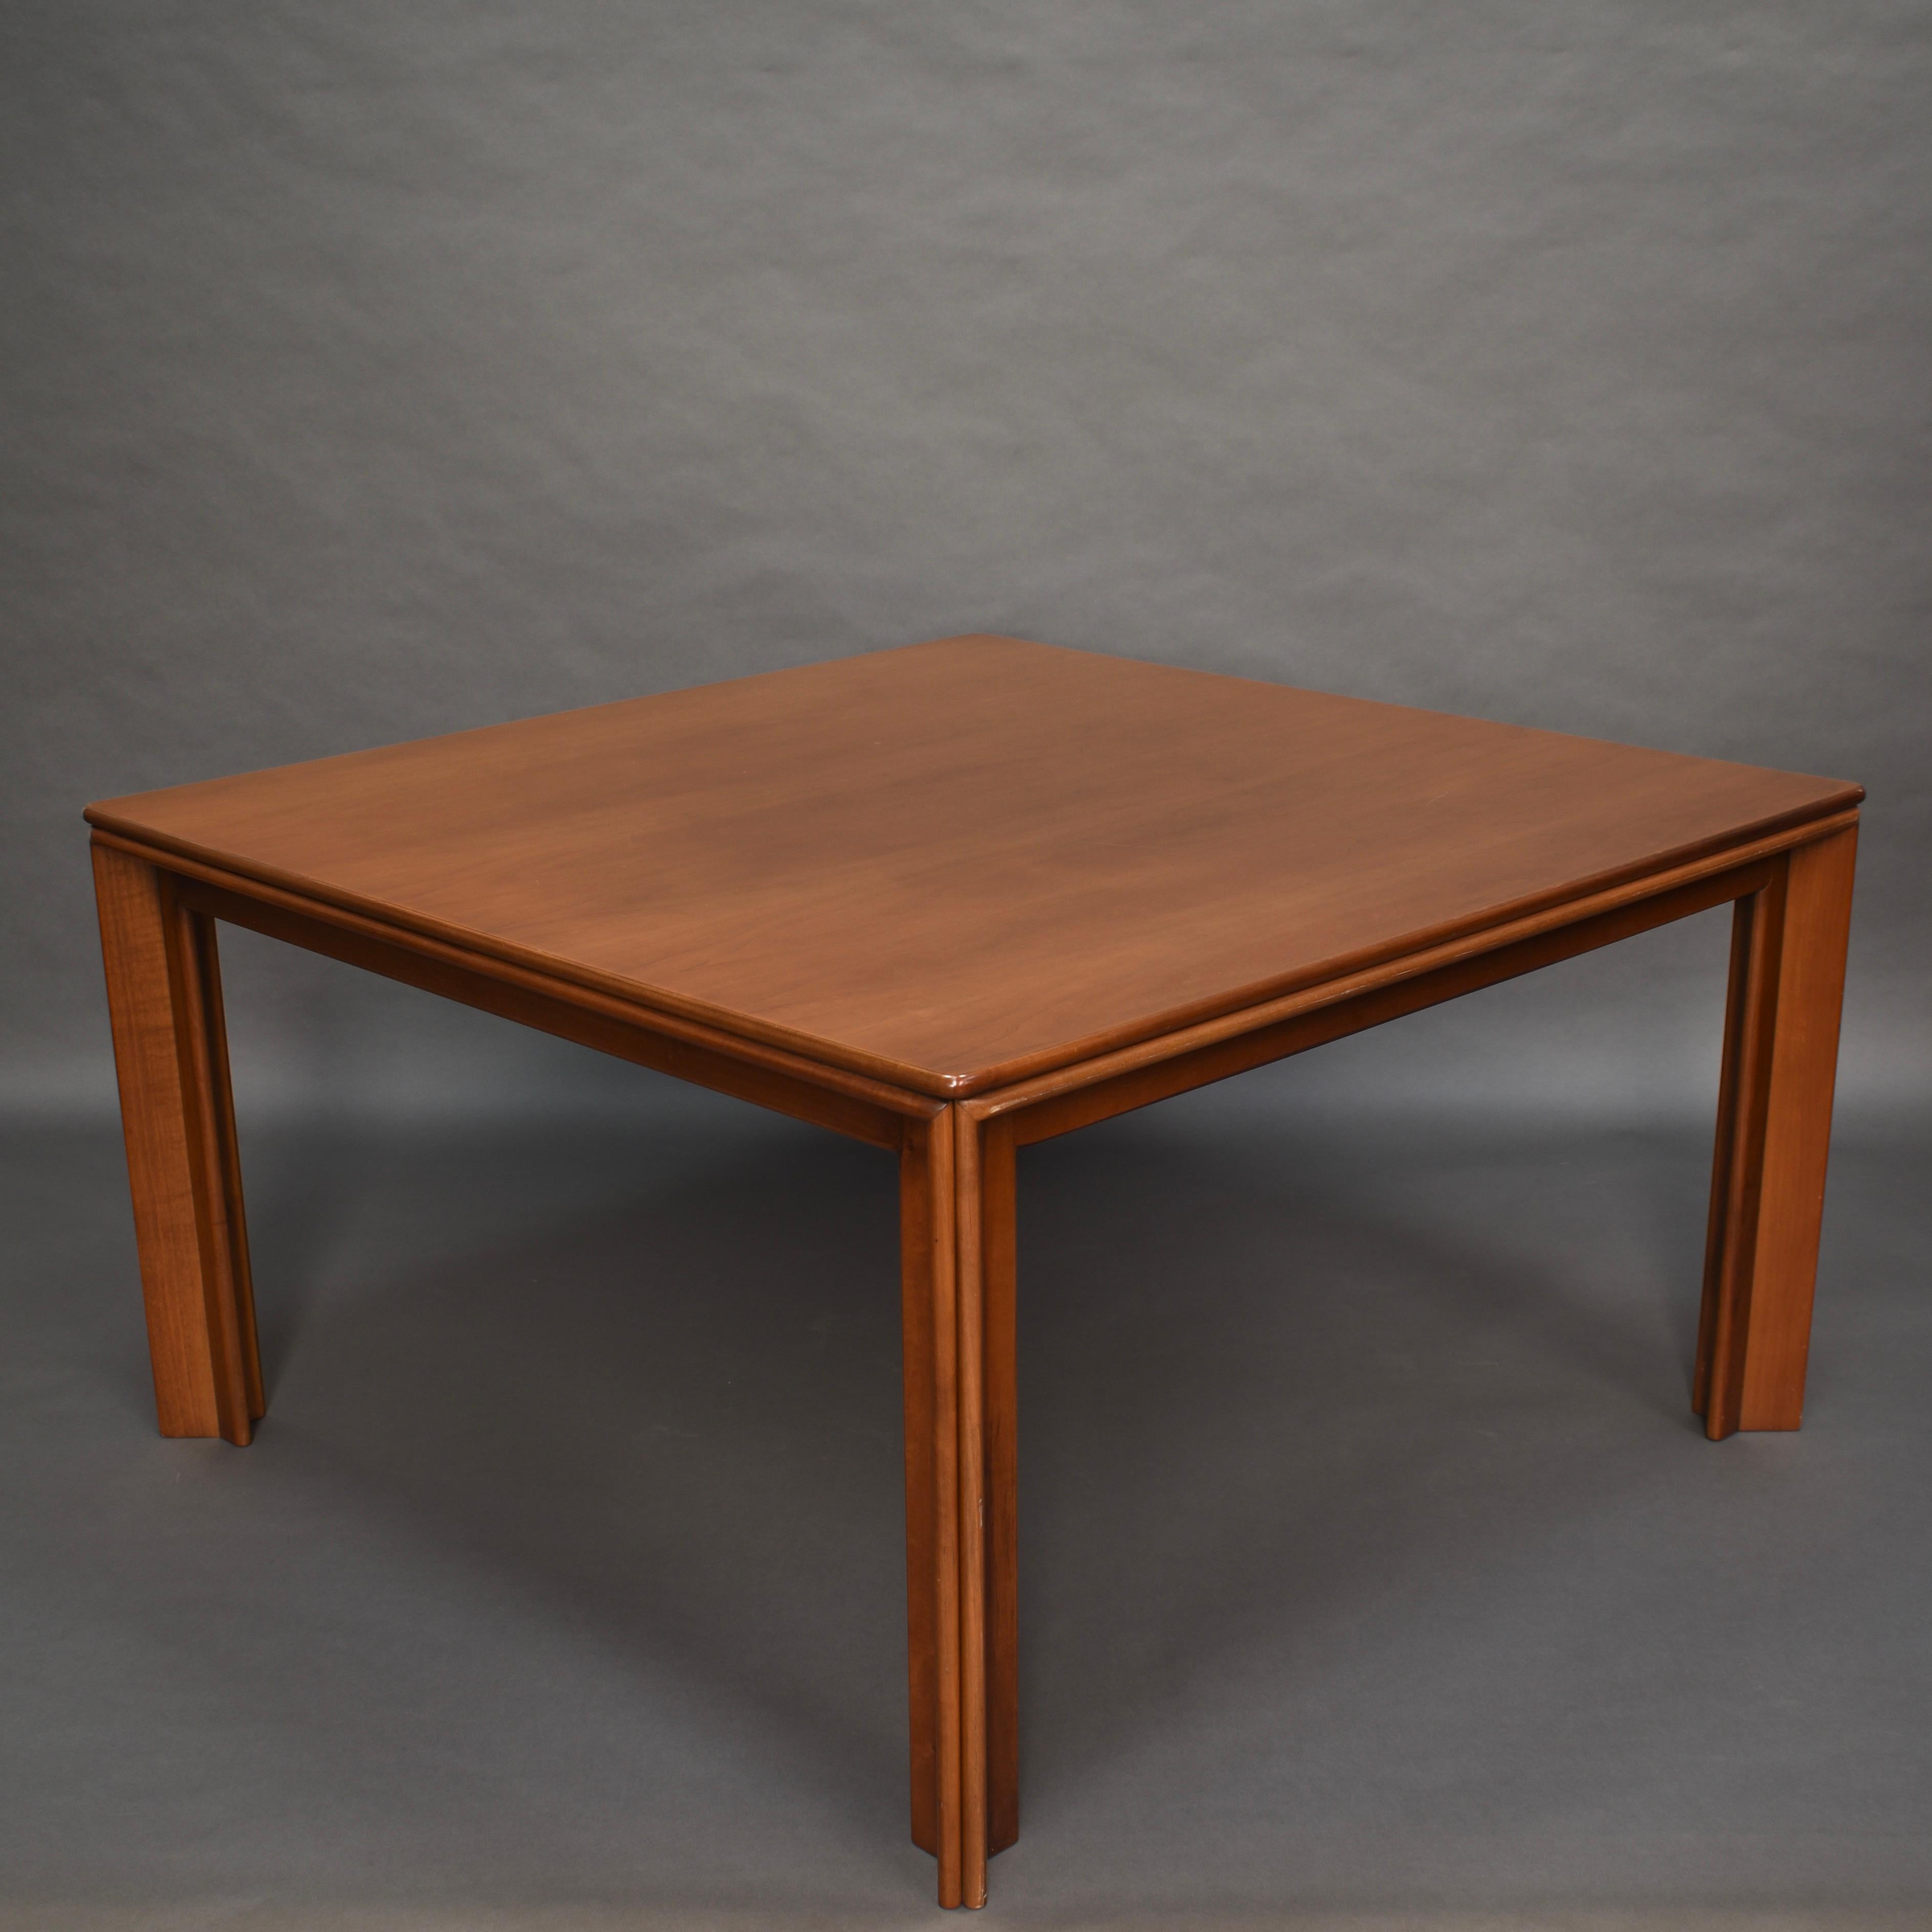 Late 20th Century Afra & Tobia Scarpa Square Dining Table in Walnut for Molteni, Italy, circa 1970